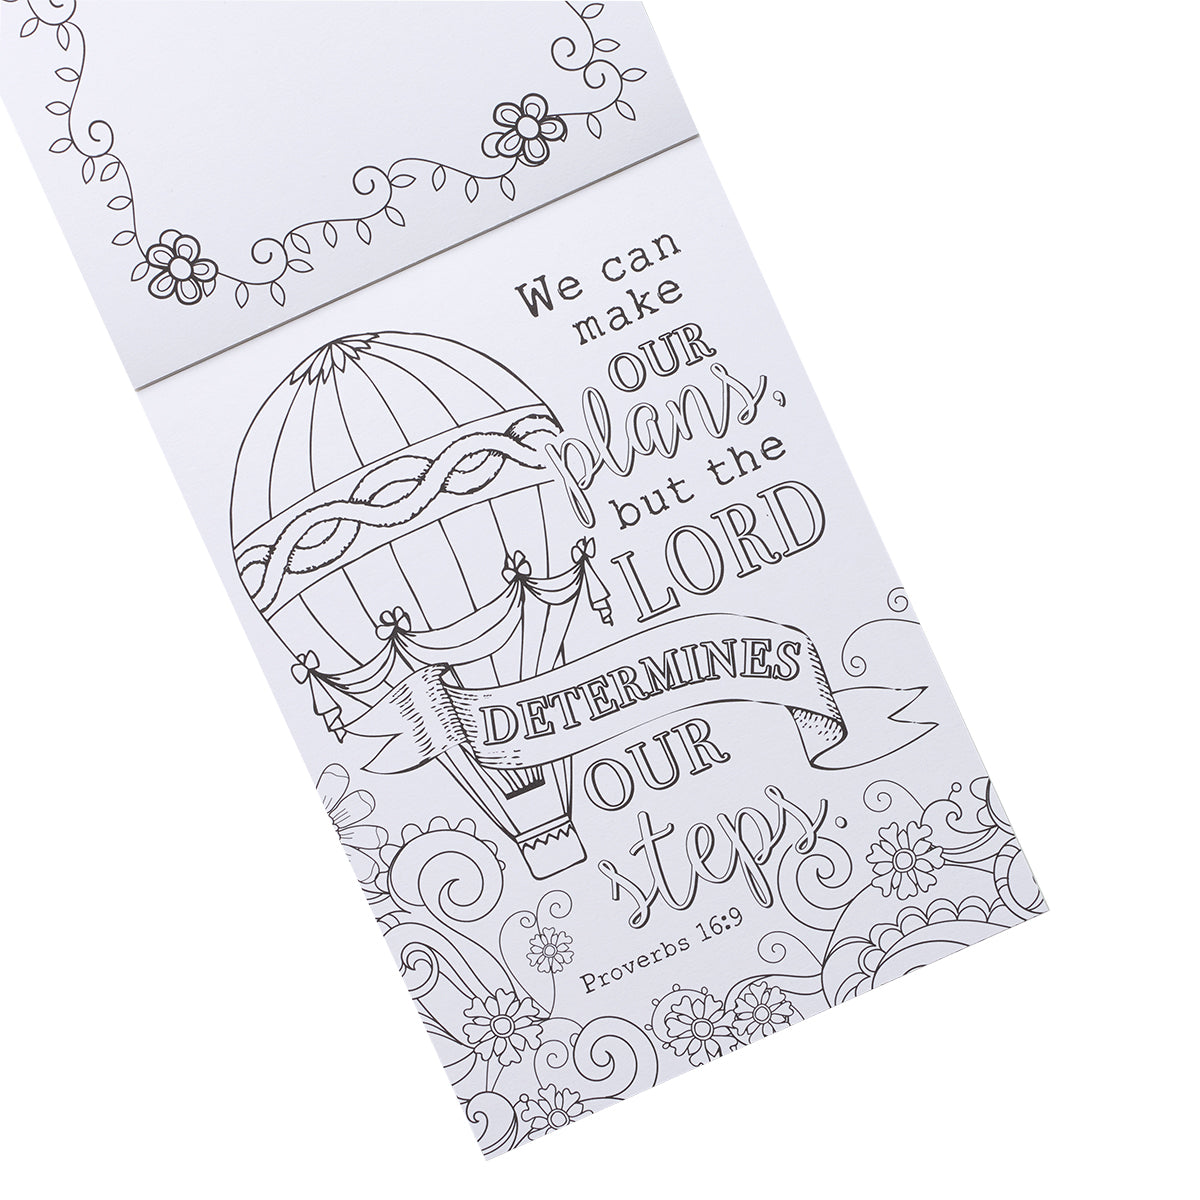 Promises to Bless Your Heart Colouring Cards - The Christian Gift Company